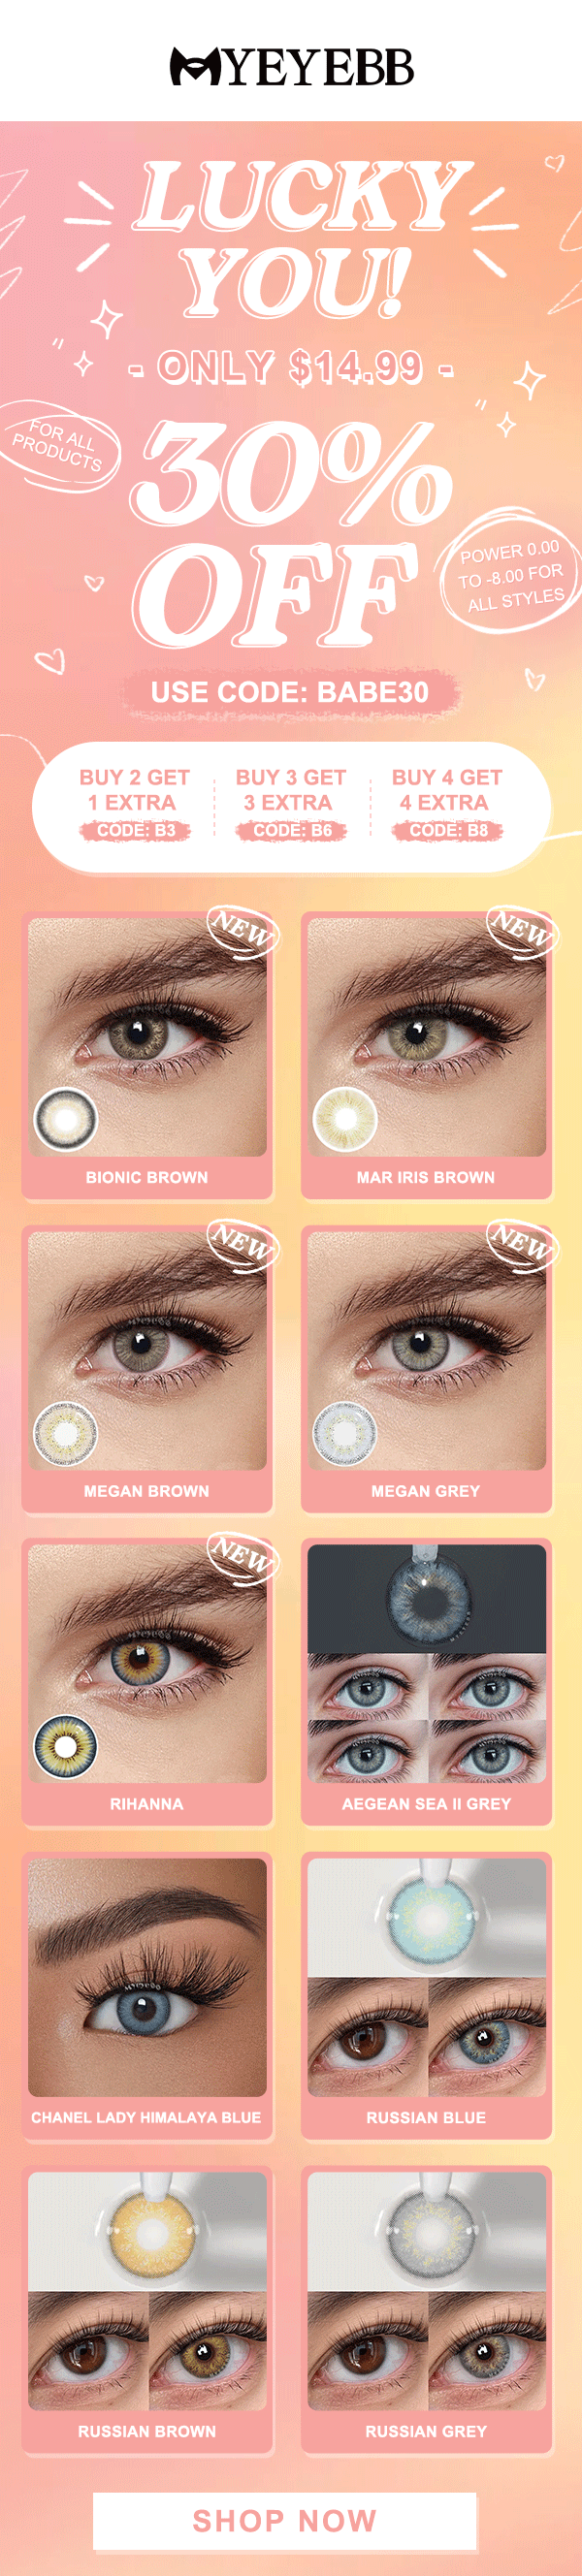  USE CODE: BABE30 BUY 2 GET BUY 3 GET BUY 4 GET 1 EXTRA 3 EXTRA 4 EXTRA i i BIONIC BROWN MAR IRIS BROWN RUSSIAN BLUE CHANEL LADY HIMALAYA BLUE RUSSIAN BROWN RUSSIAN GREY 